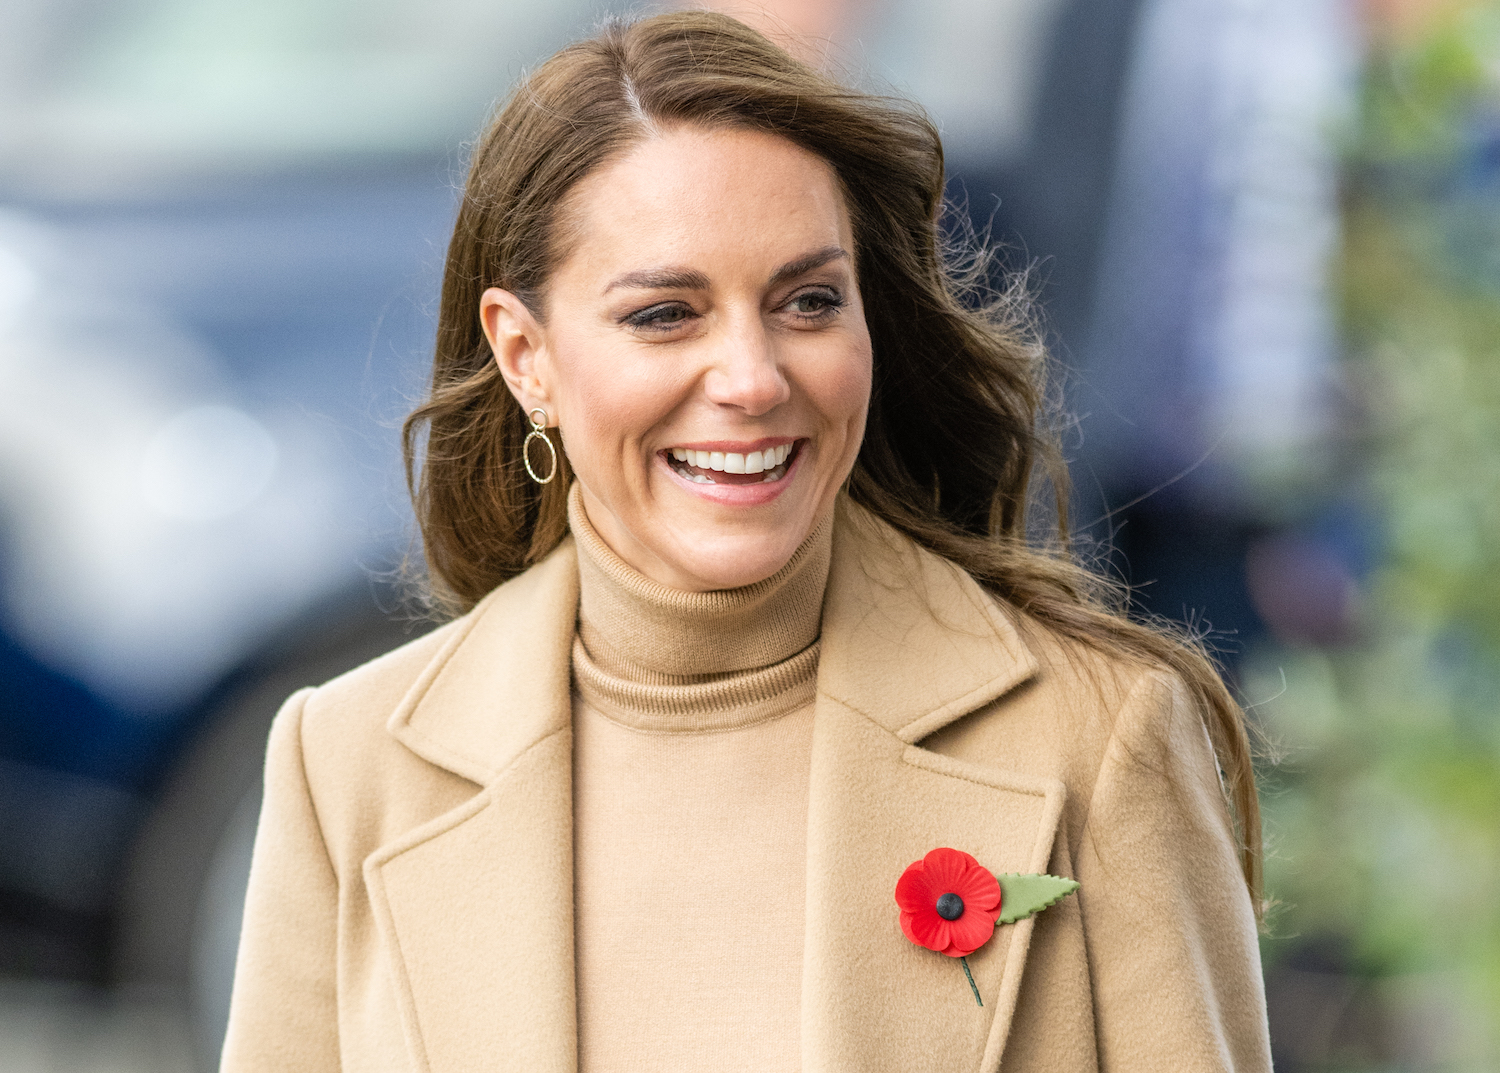 Kate Middleton body language shows how she changed since assuming new role as Princess of Wales